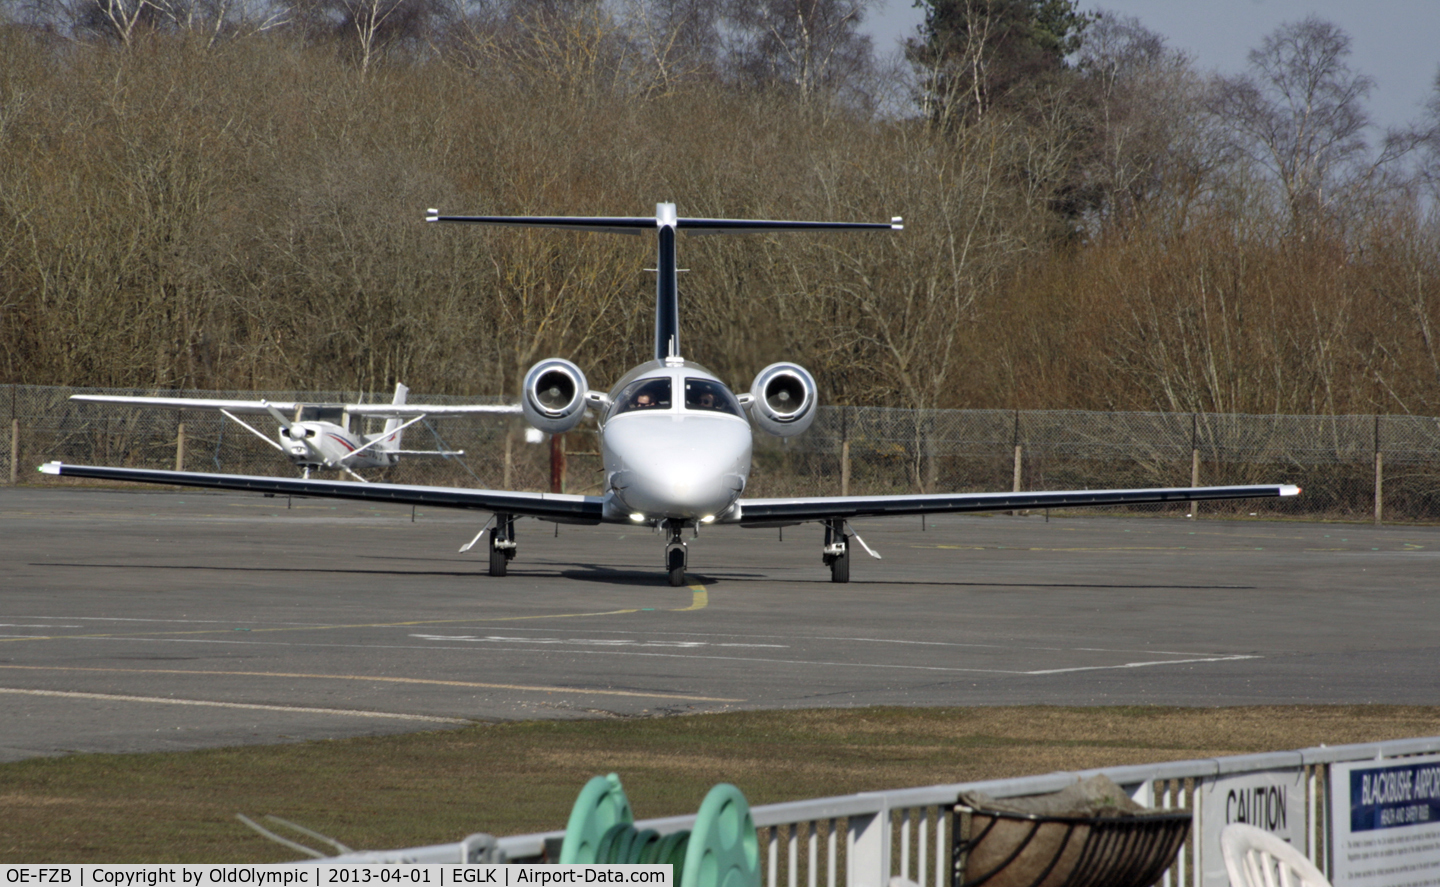 OE-FZB, 2008 Cessna 510 Citation Mustang Citation Mustang C/N 510-0145, Leaving stand for  departure R/W 07